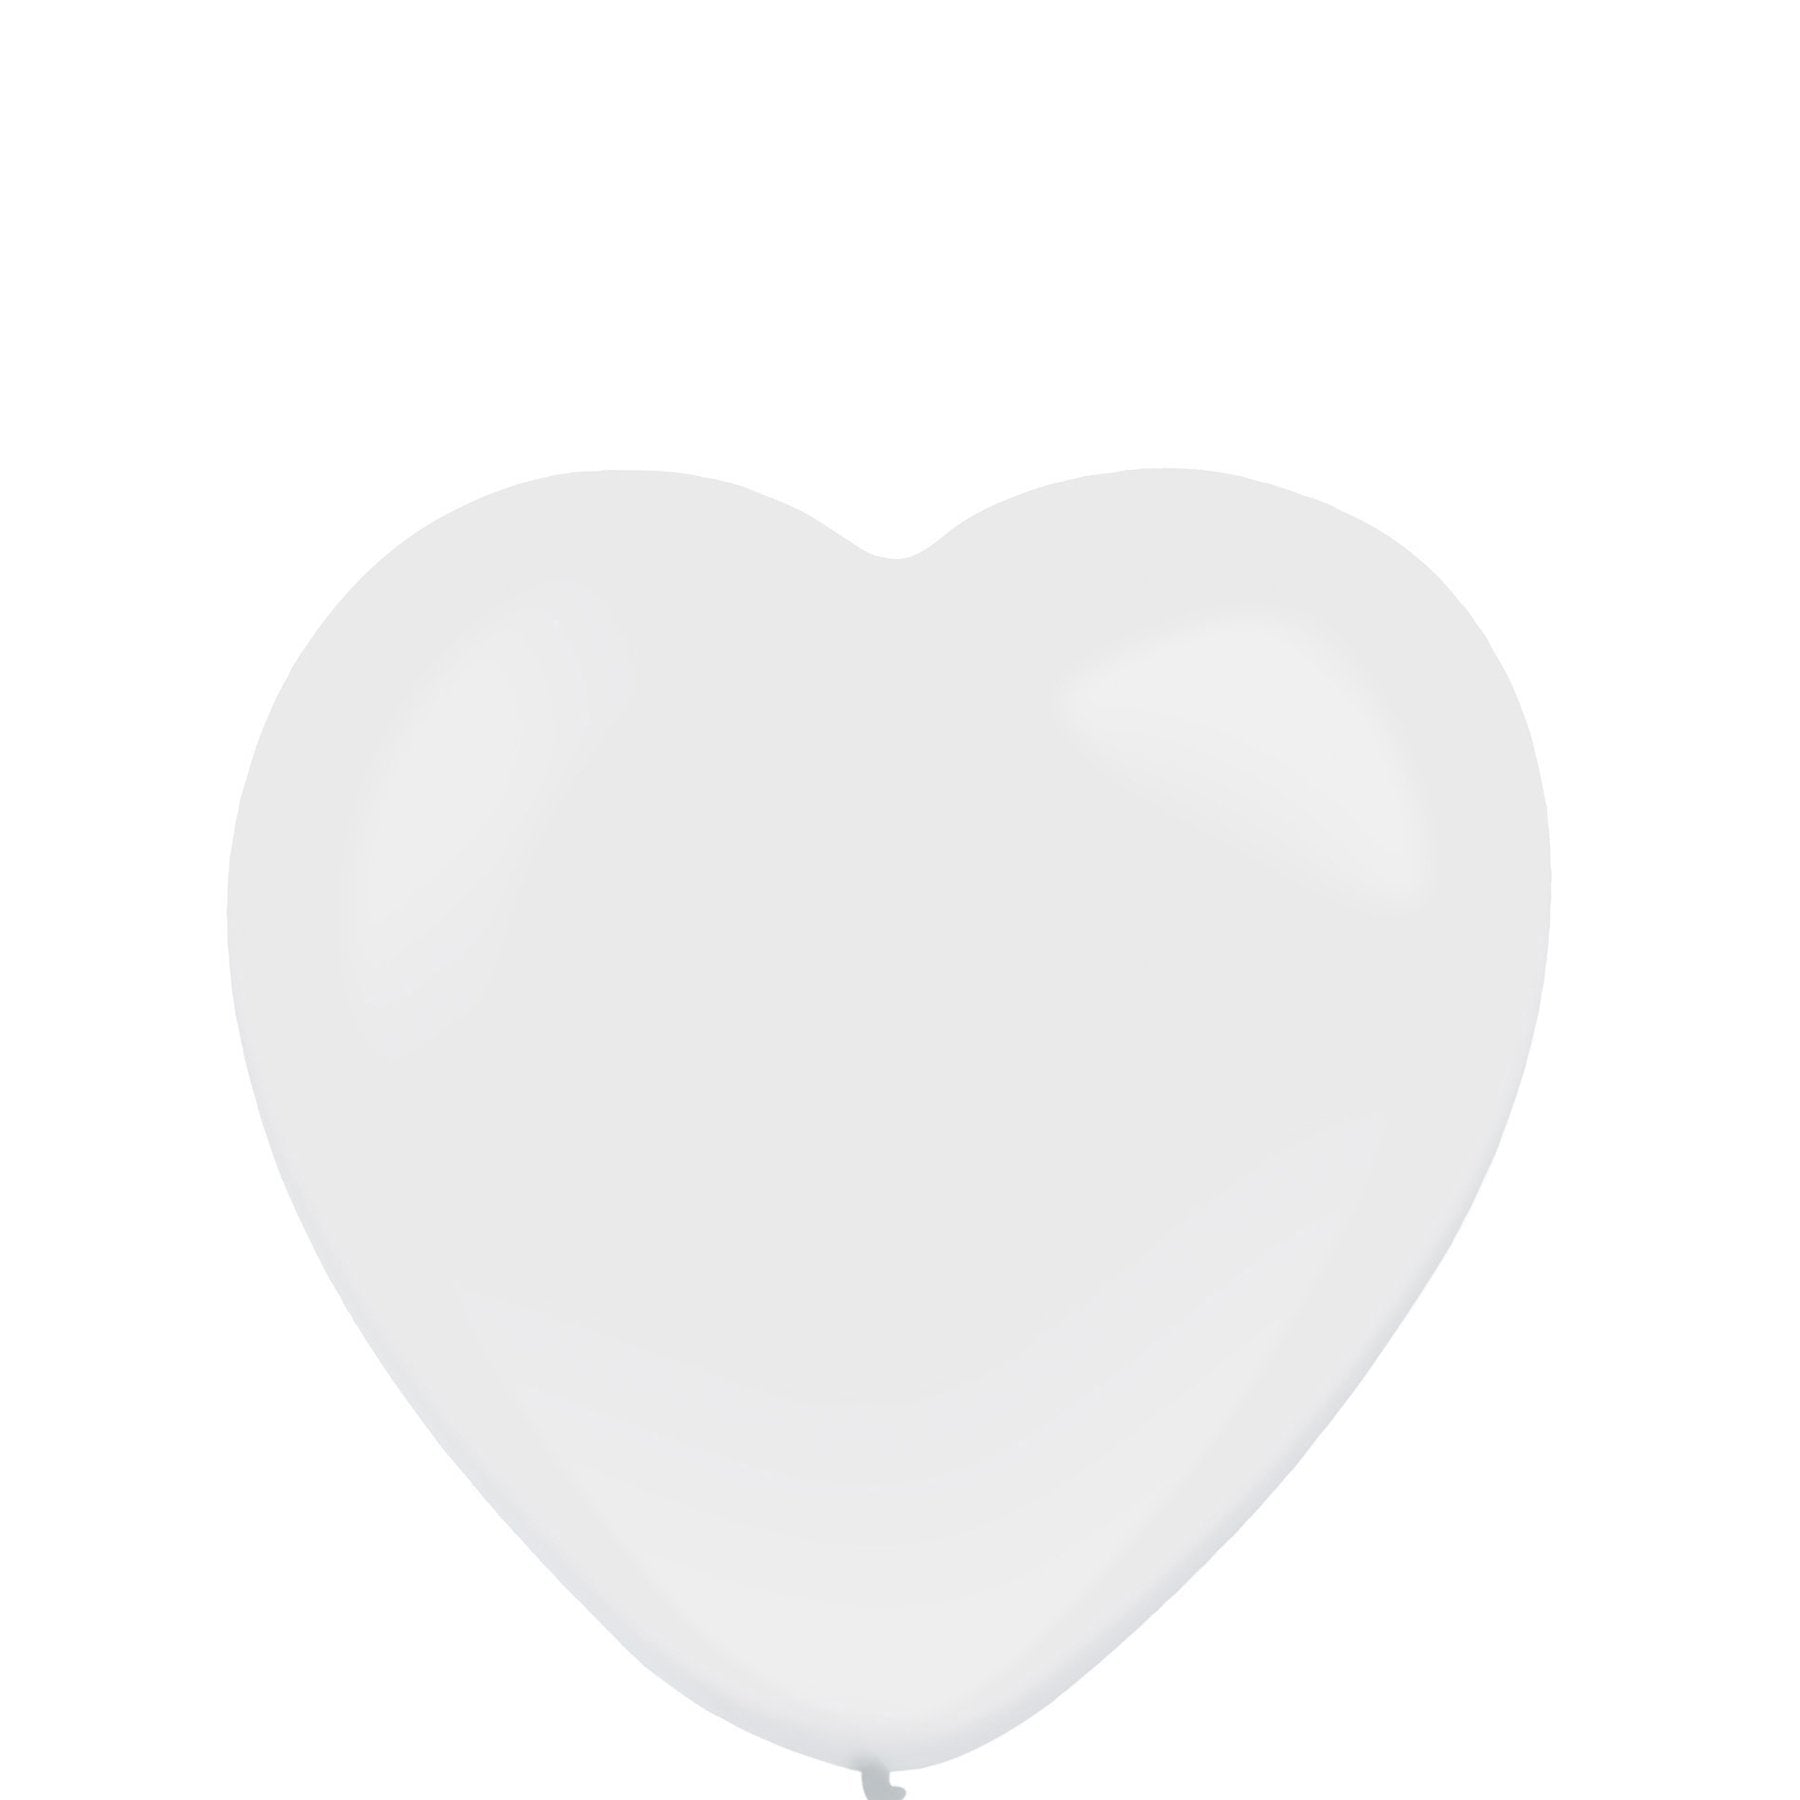 Frosty White Standard Heart Latex Balloons 50pcs Balloons & Streamers - Party Centre - Party Centre